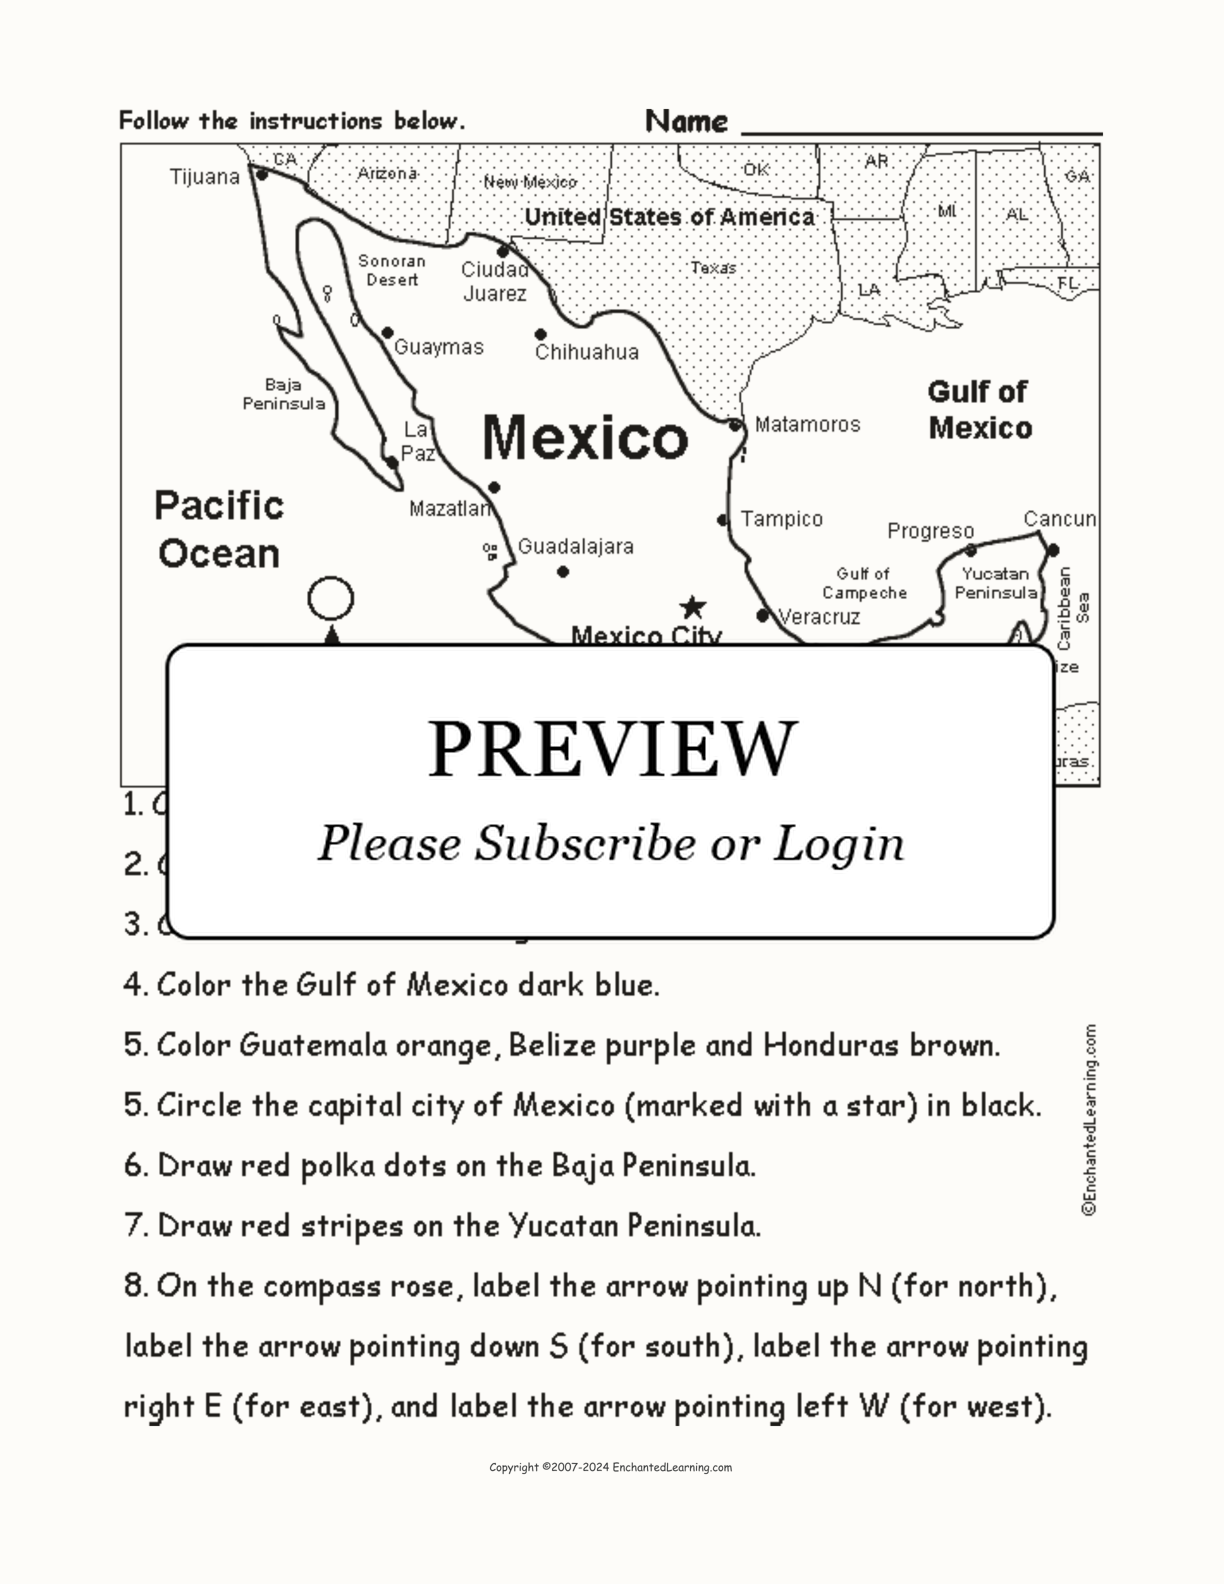 Mexico - Follow the Instructions interactive worksheet page 1